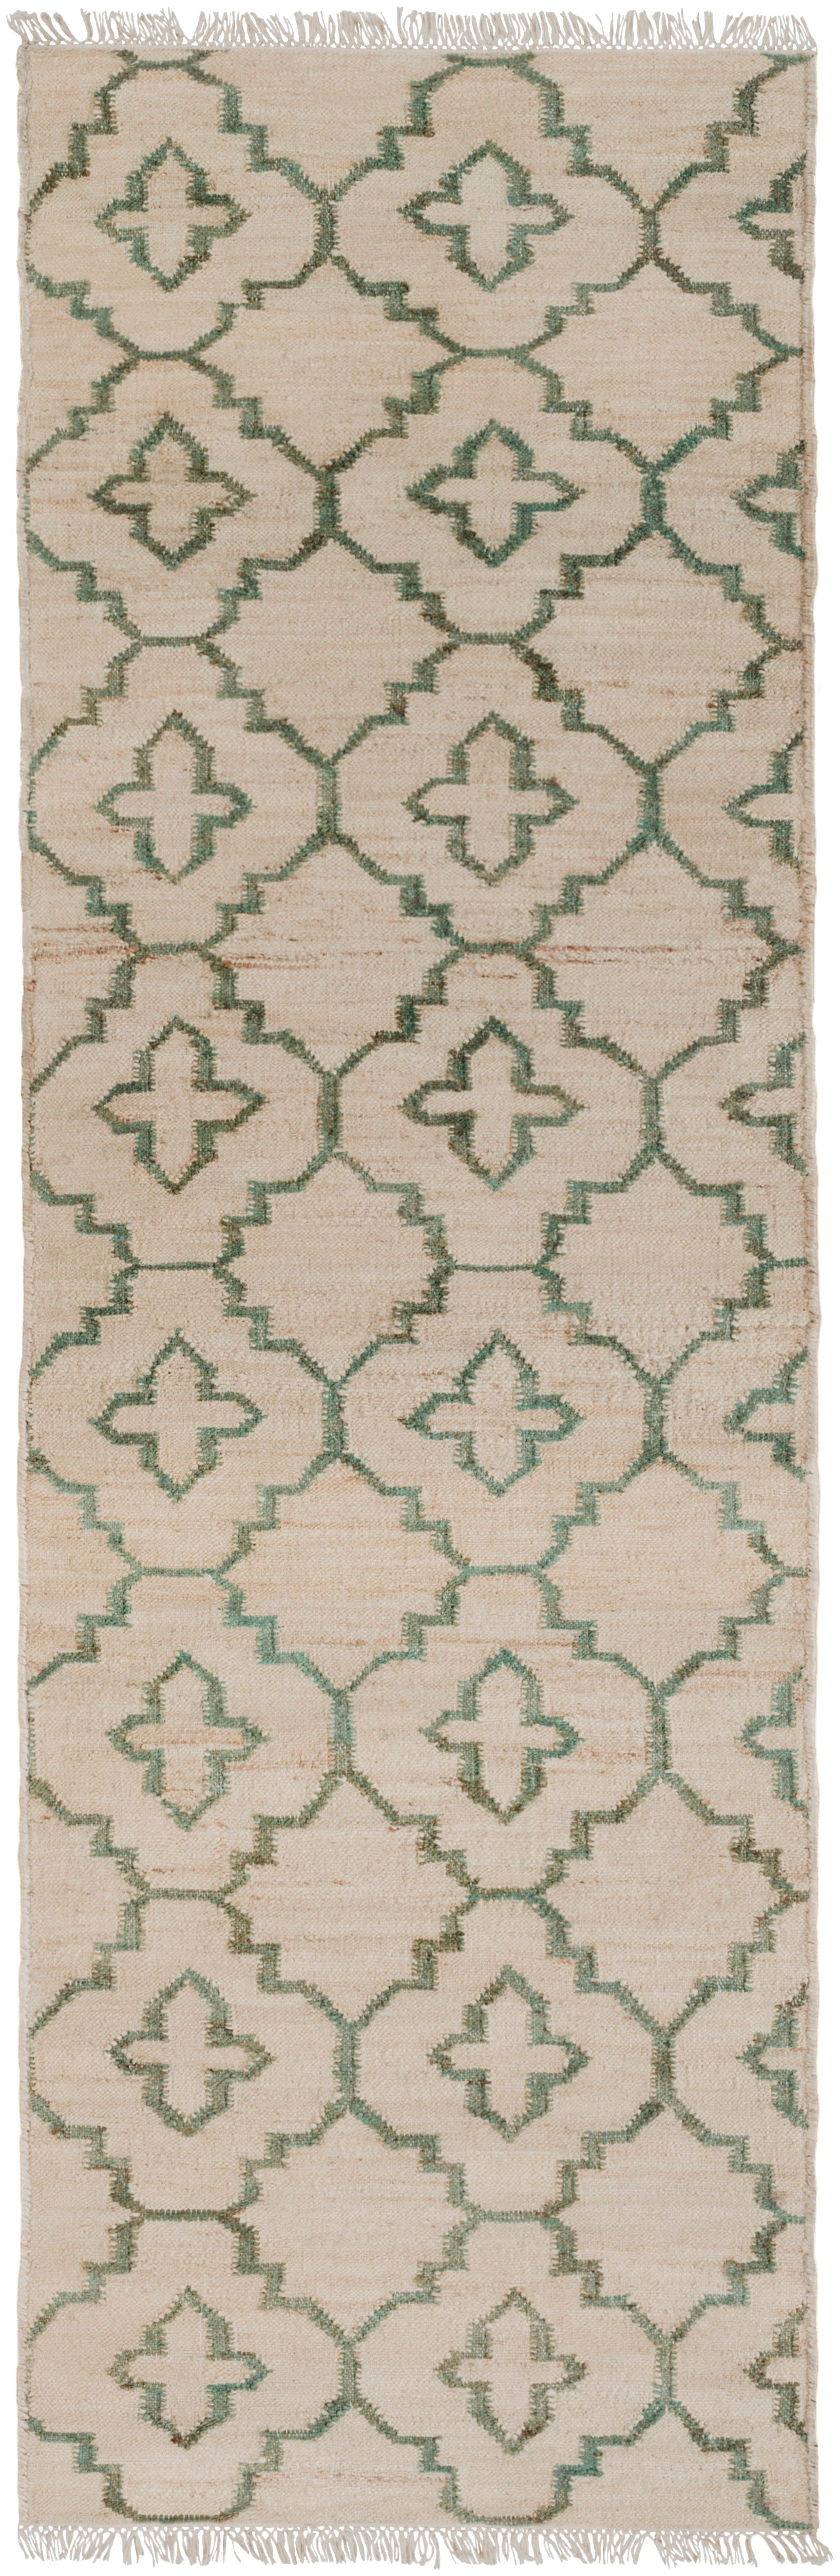 Surya Laural LRL6012 Neutral/Green Natural Fiber and Texture Area Rug